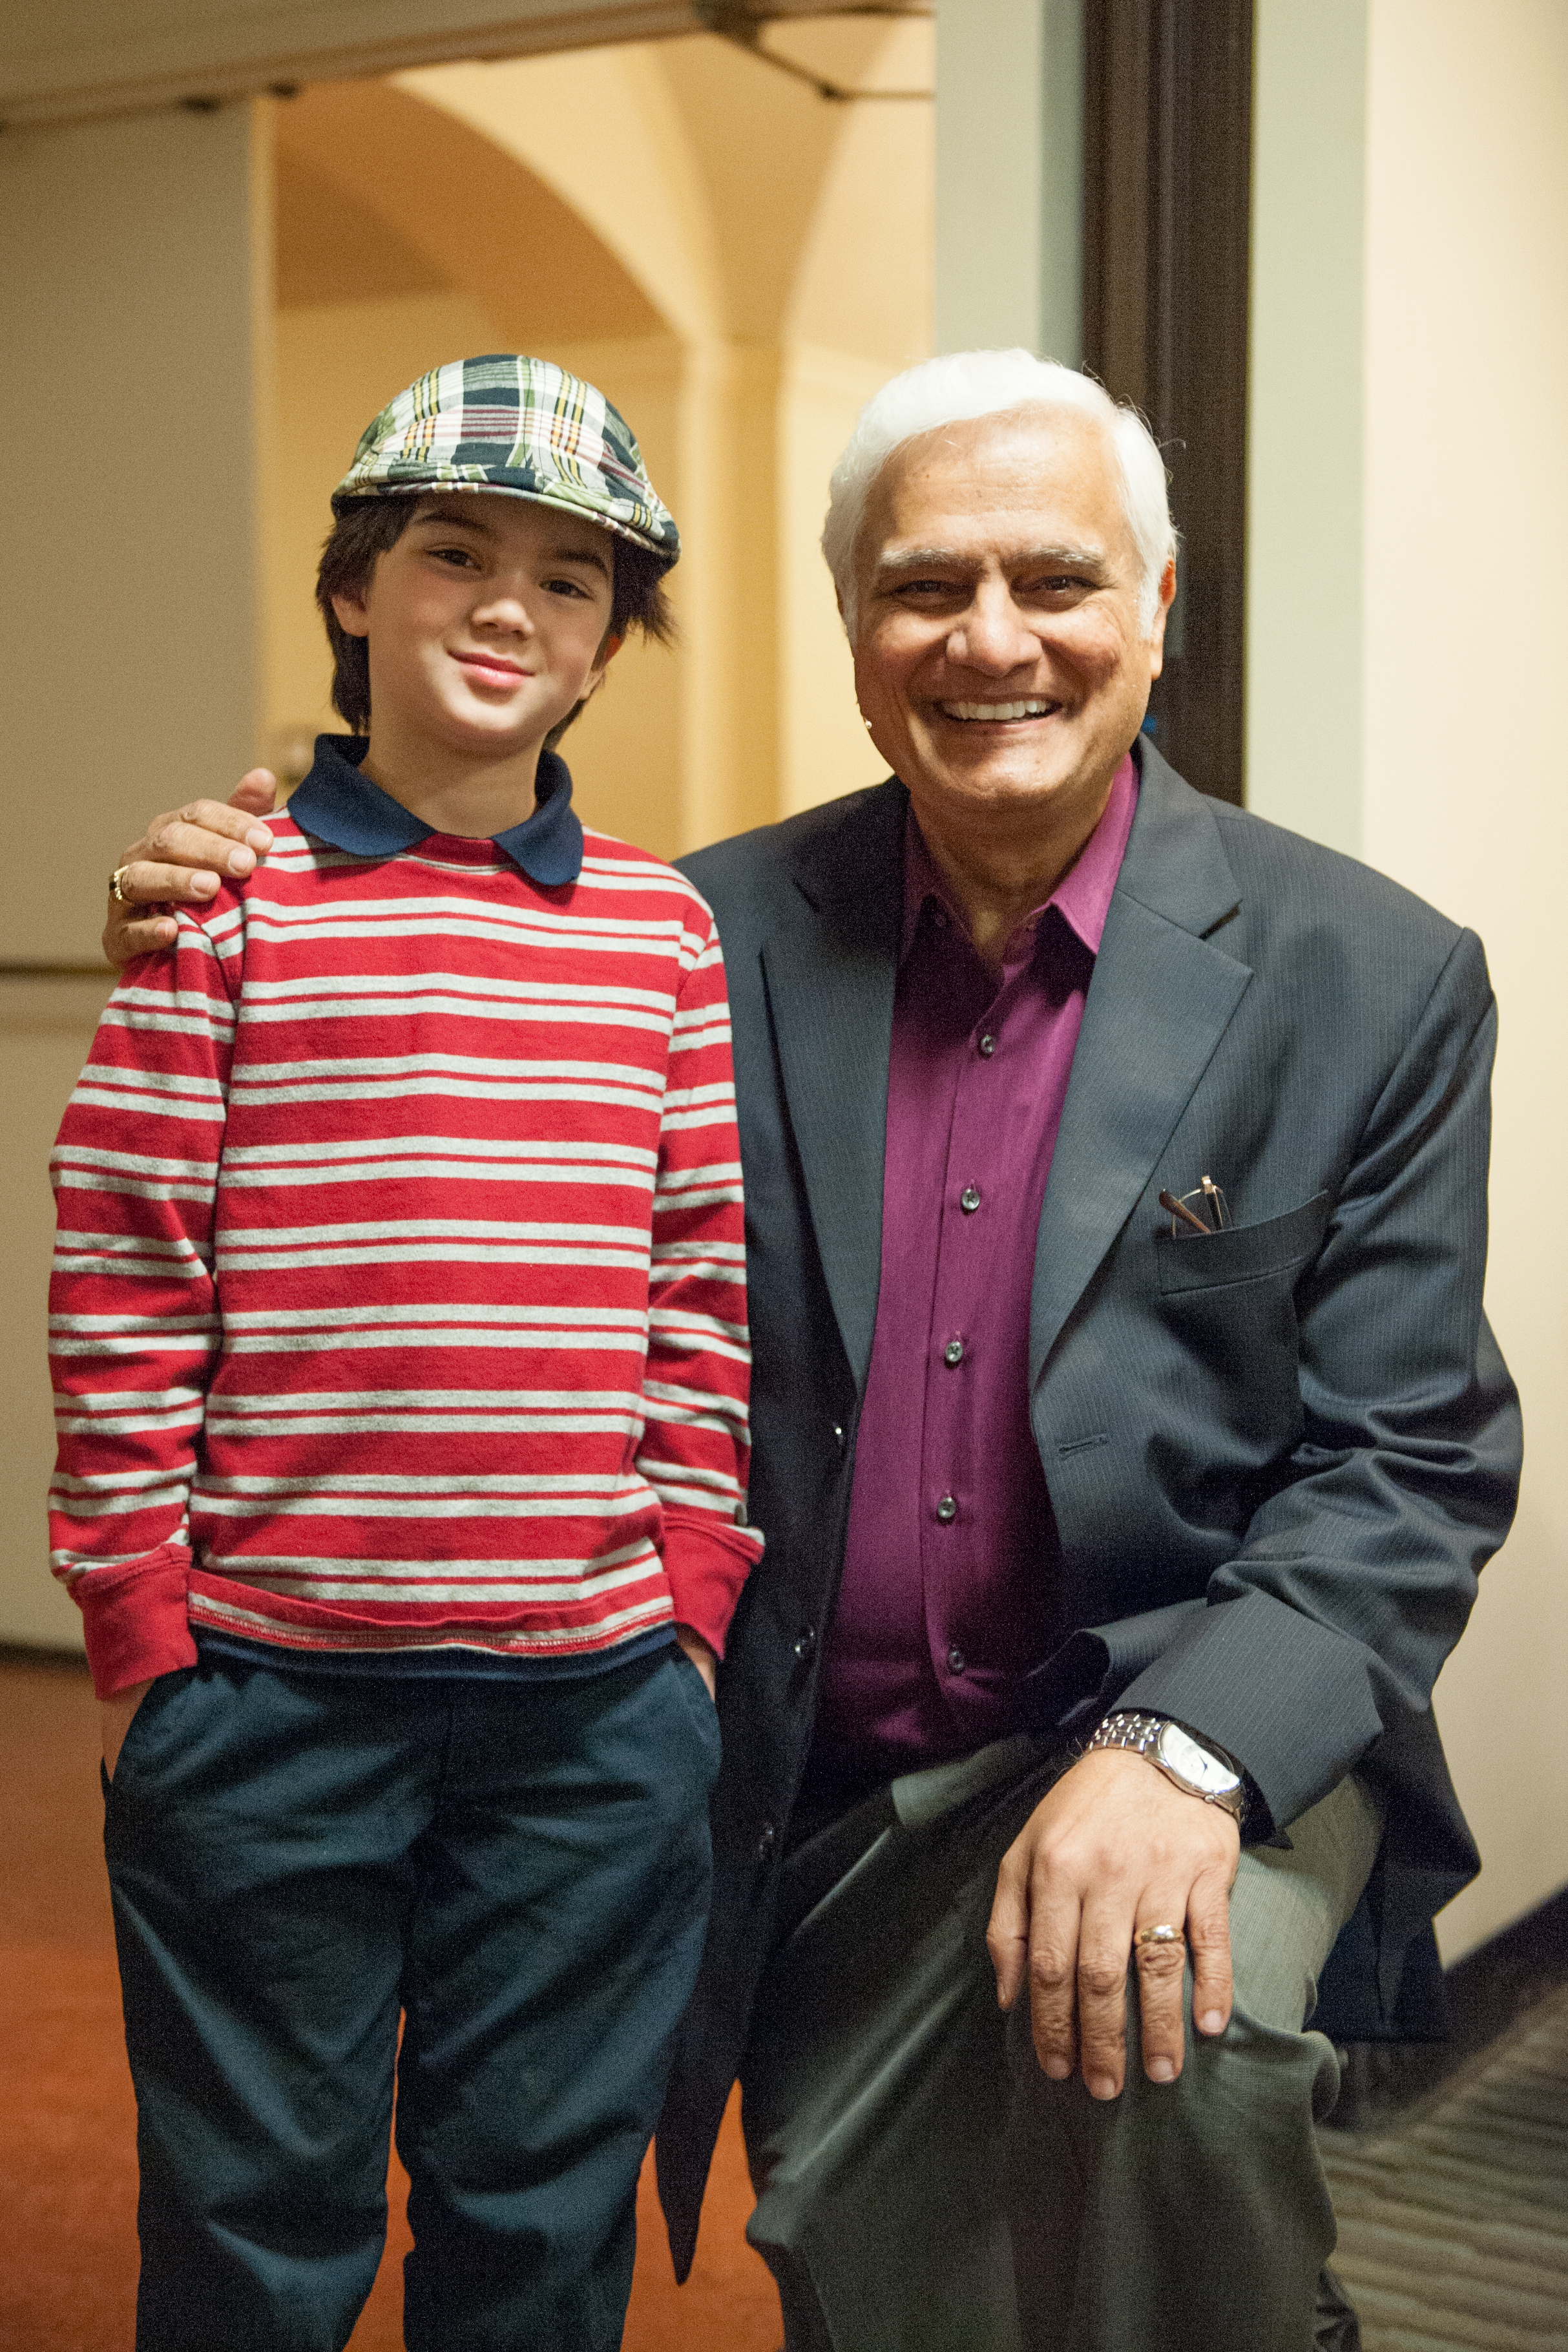 Backstage at UCLA Royce Hall meeting Dr. Ravi Zacharias, (1 of 2 